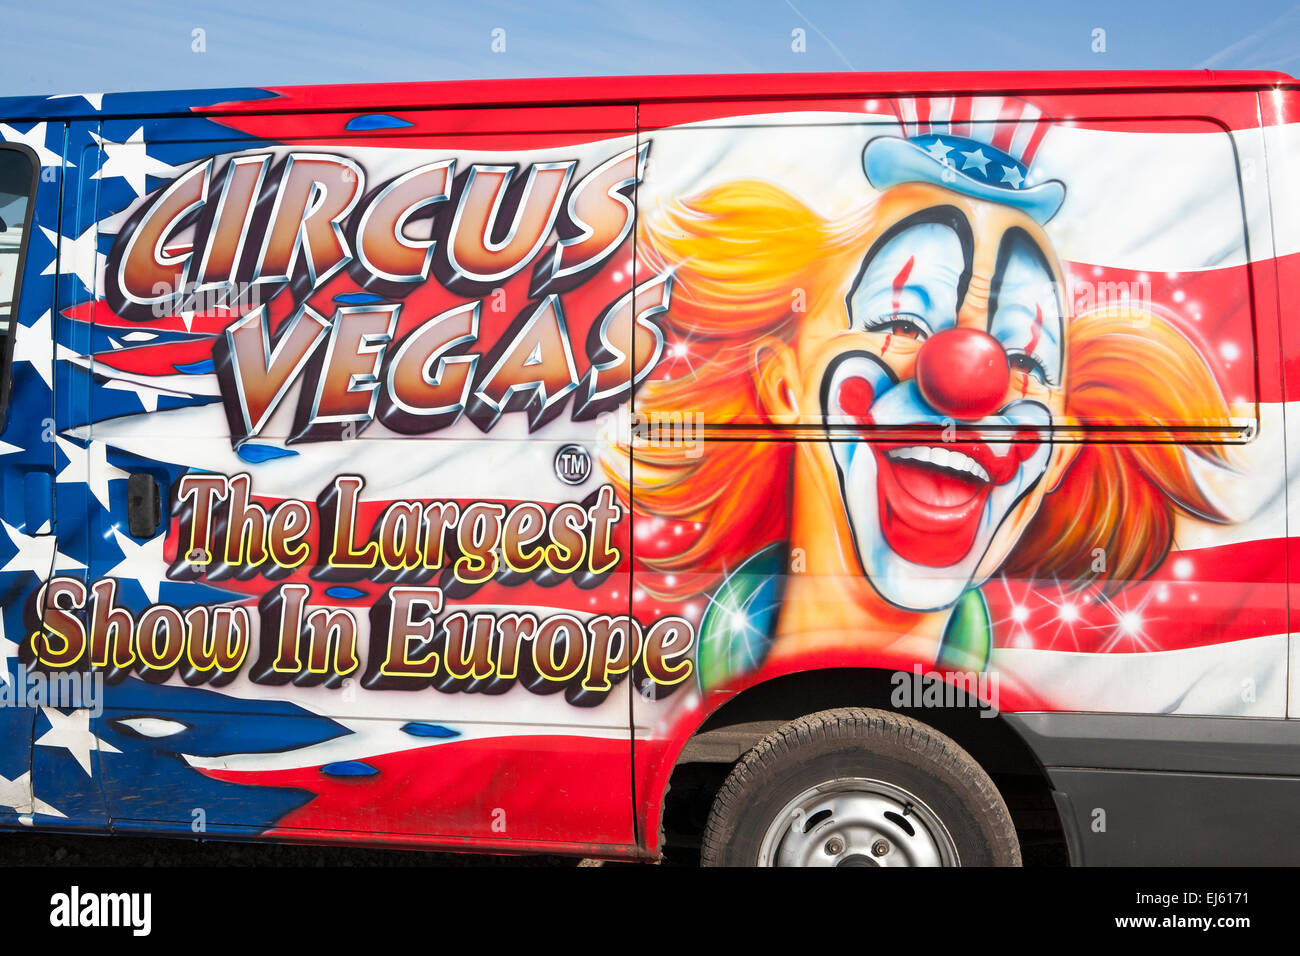 Southport, Merseyside, UK. 22nd Mar, 2015. The all-human circus spectacular, owned by Show Directors John Courtney and Stephen Courtney trading as Circus Vegas/American Circus has arrived in SOUTHPORT, the travelling show produced by the famous Uncle Sam's Great American Circus, tours for ten months a year.  It is an Irish organisation, but its star-spangled selection of American Kenworth and Peterbilt decorated trucks look the part when they roll into town. Credit:  Cernan Elias/Alamy Live News Stock Photo